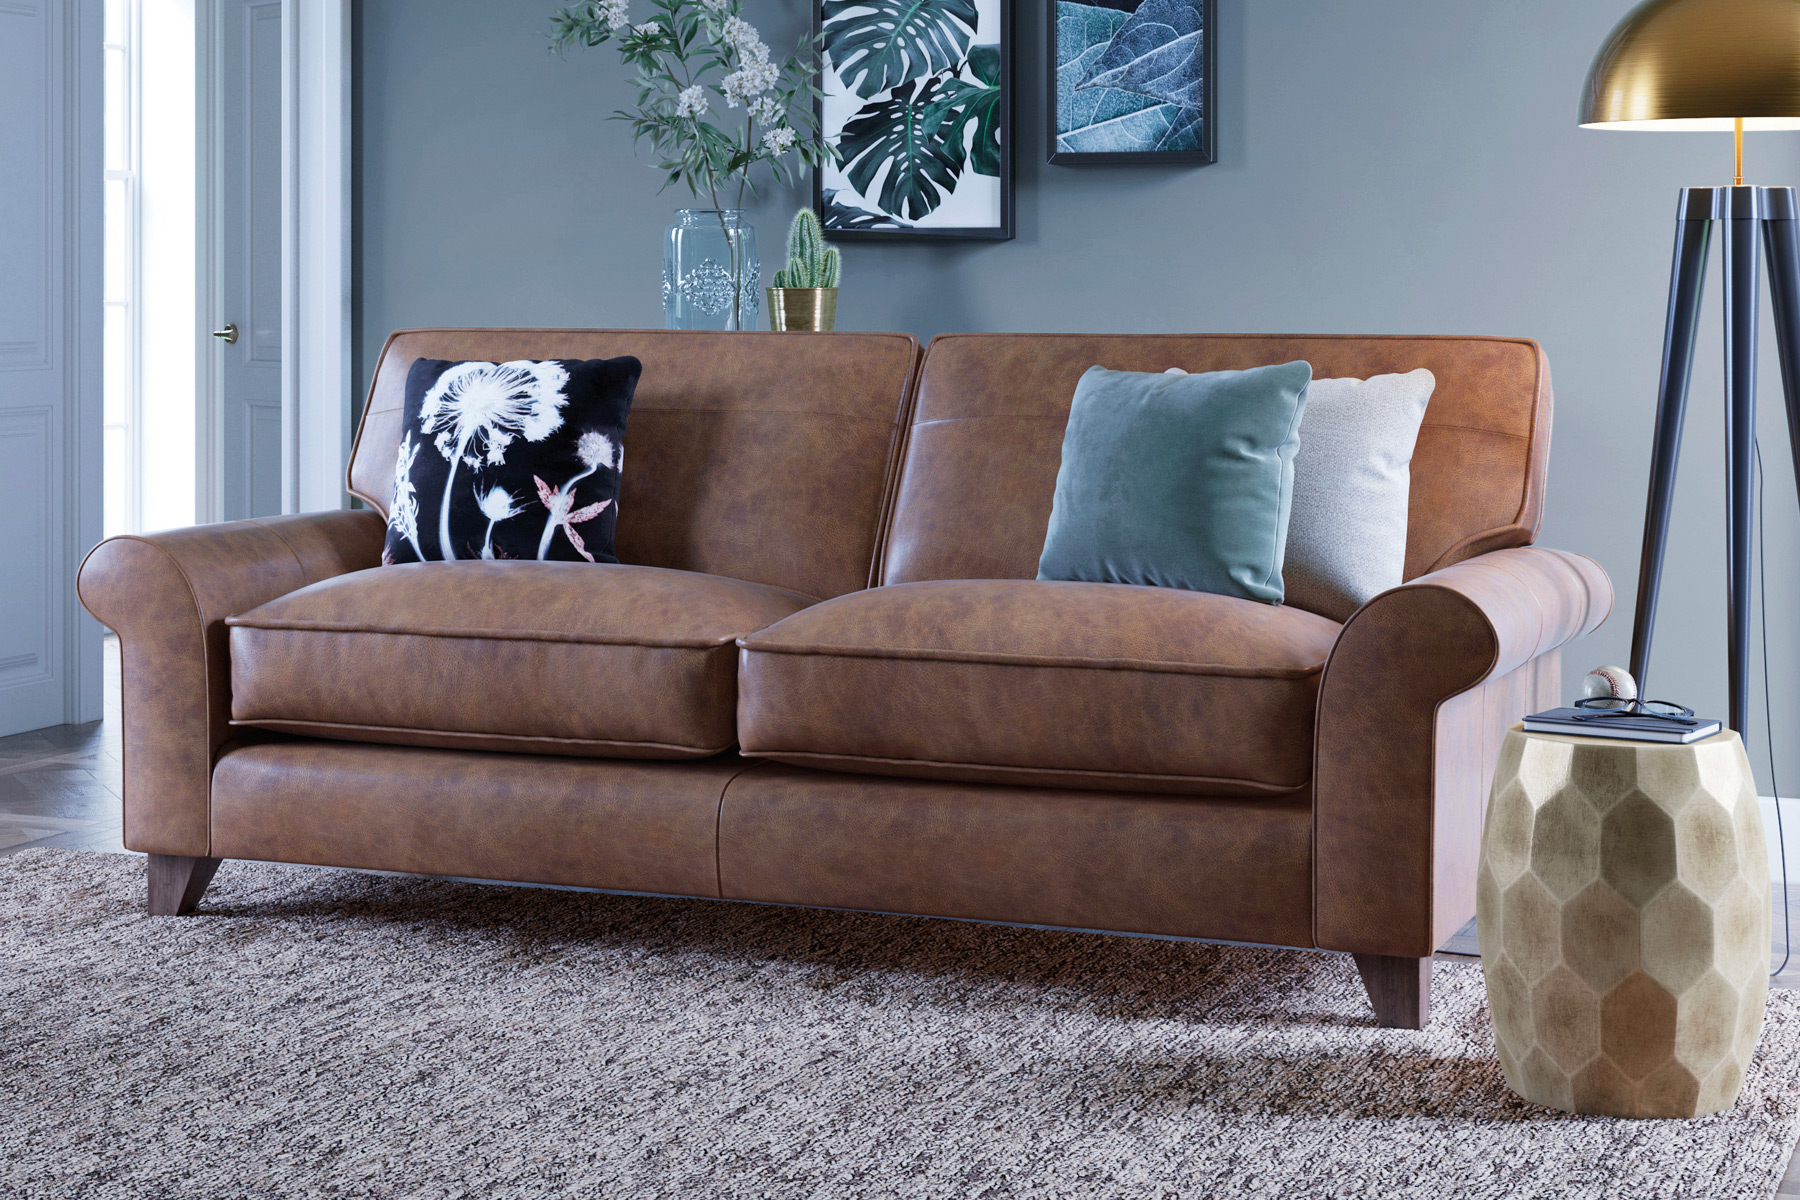 How to choose the right leather sofa